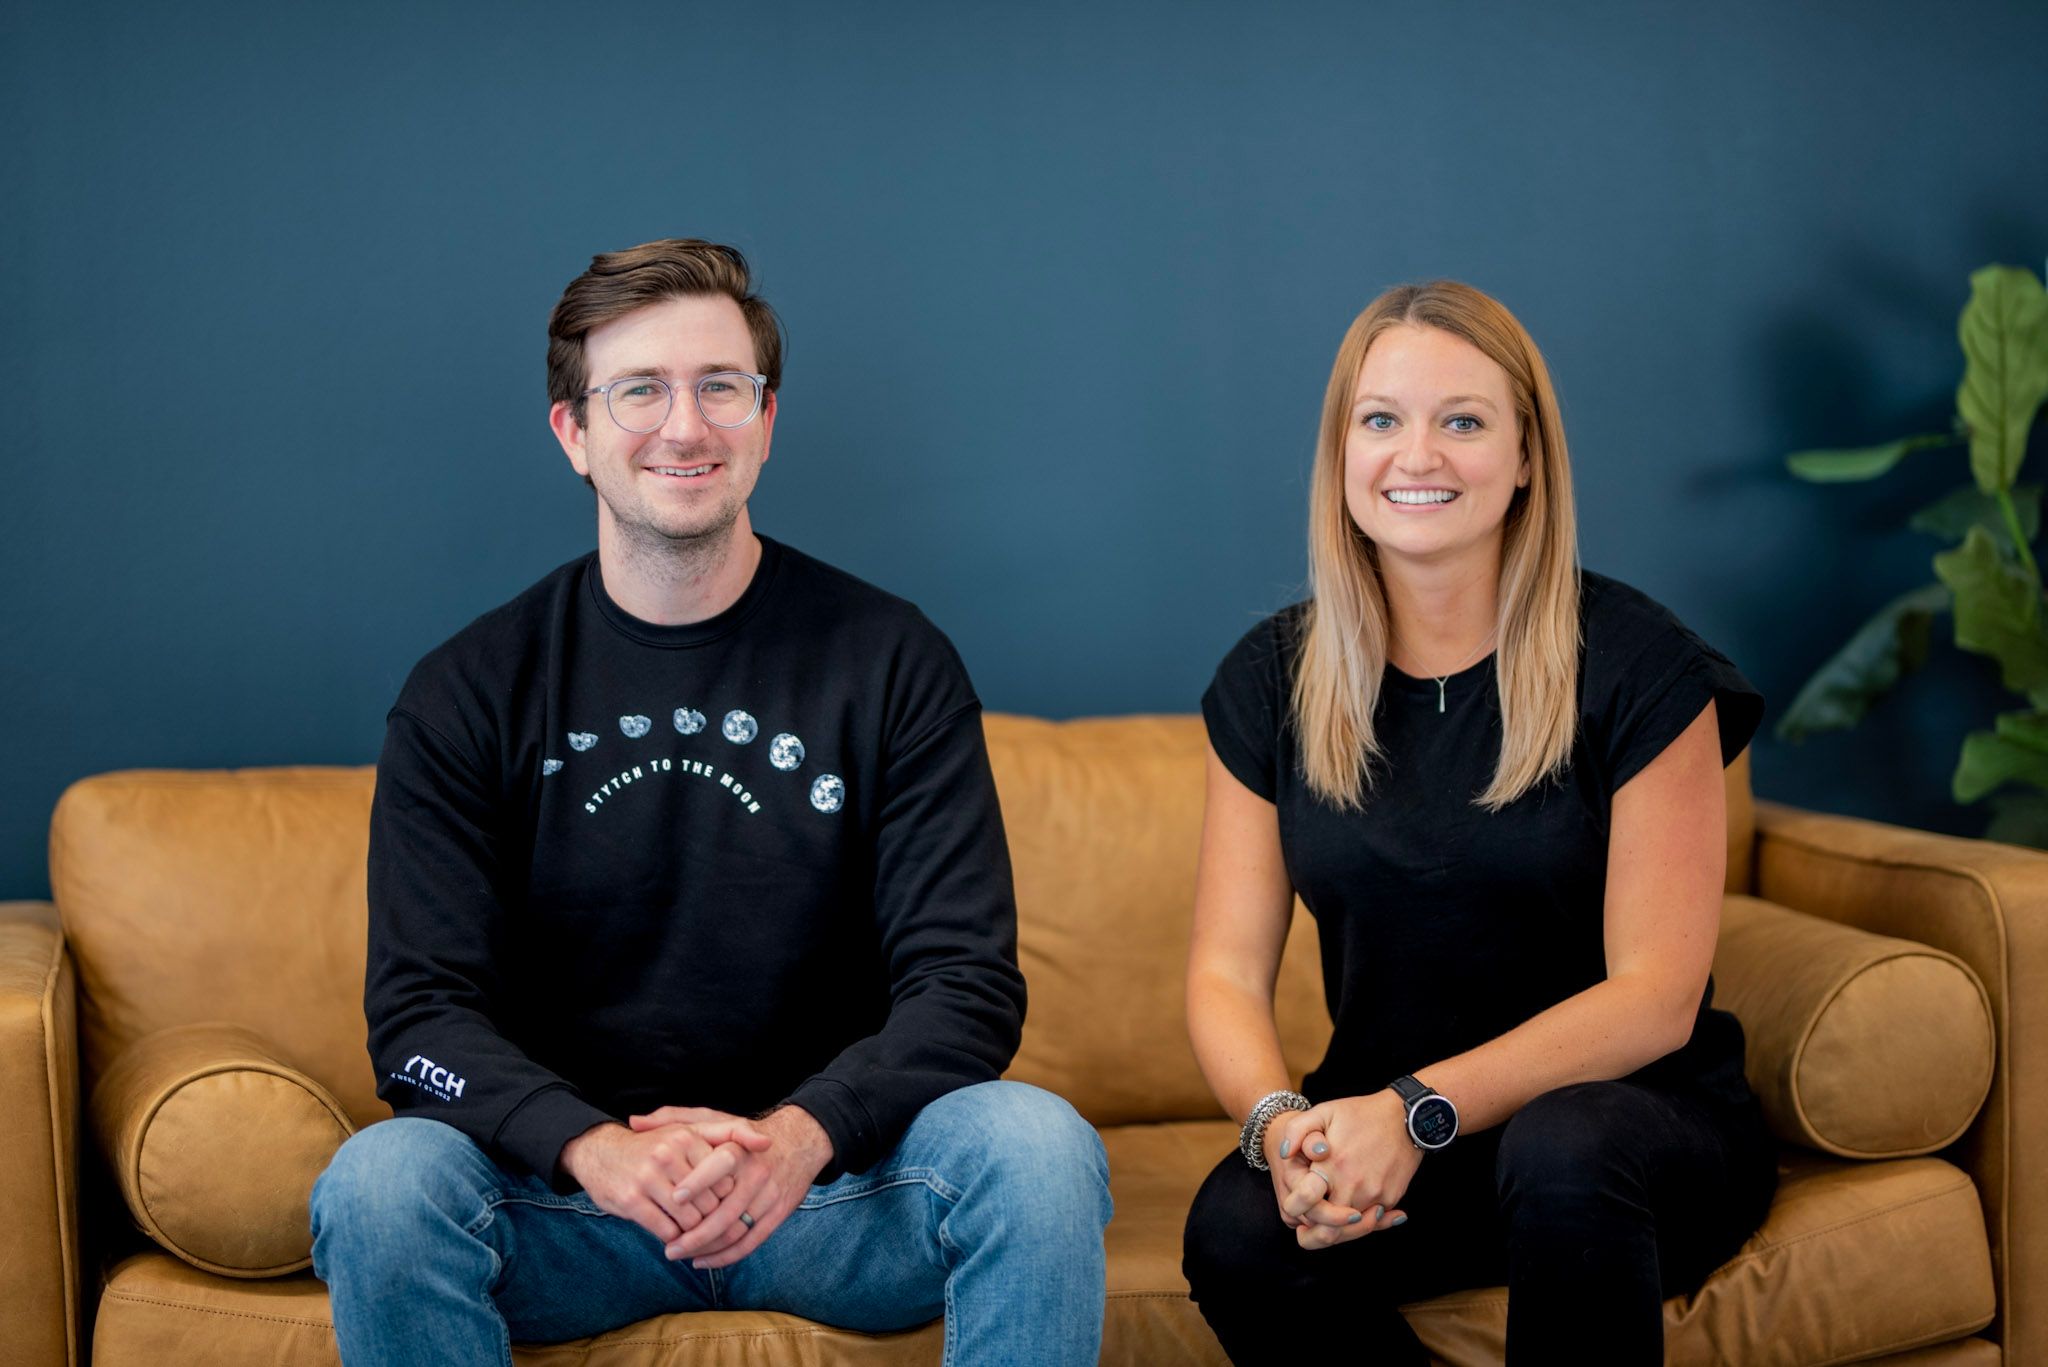 Photo of Stytch founders Reed McGinley-Stempel and Julianna Lamb, seated on a tan leather couch, both in black tees.